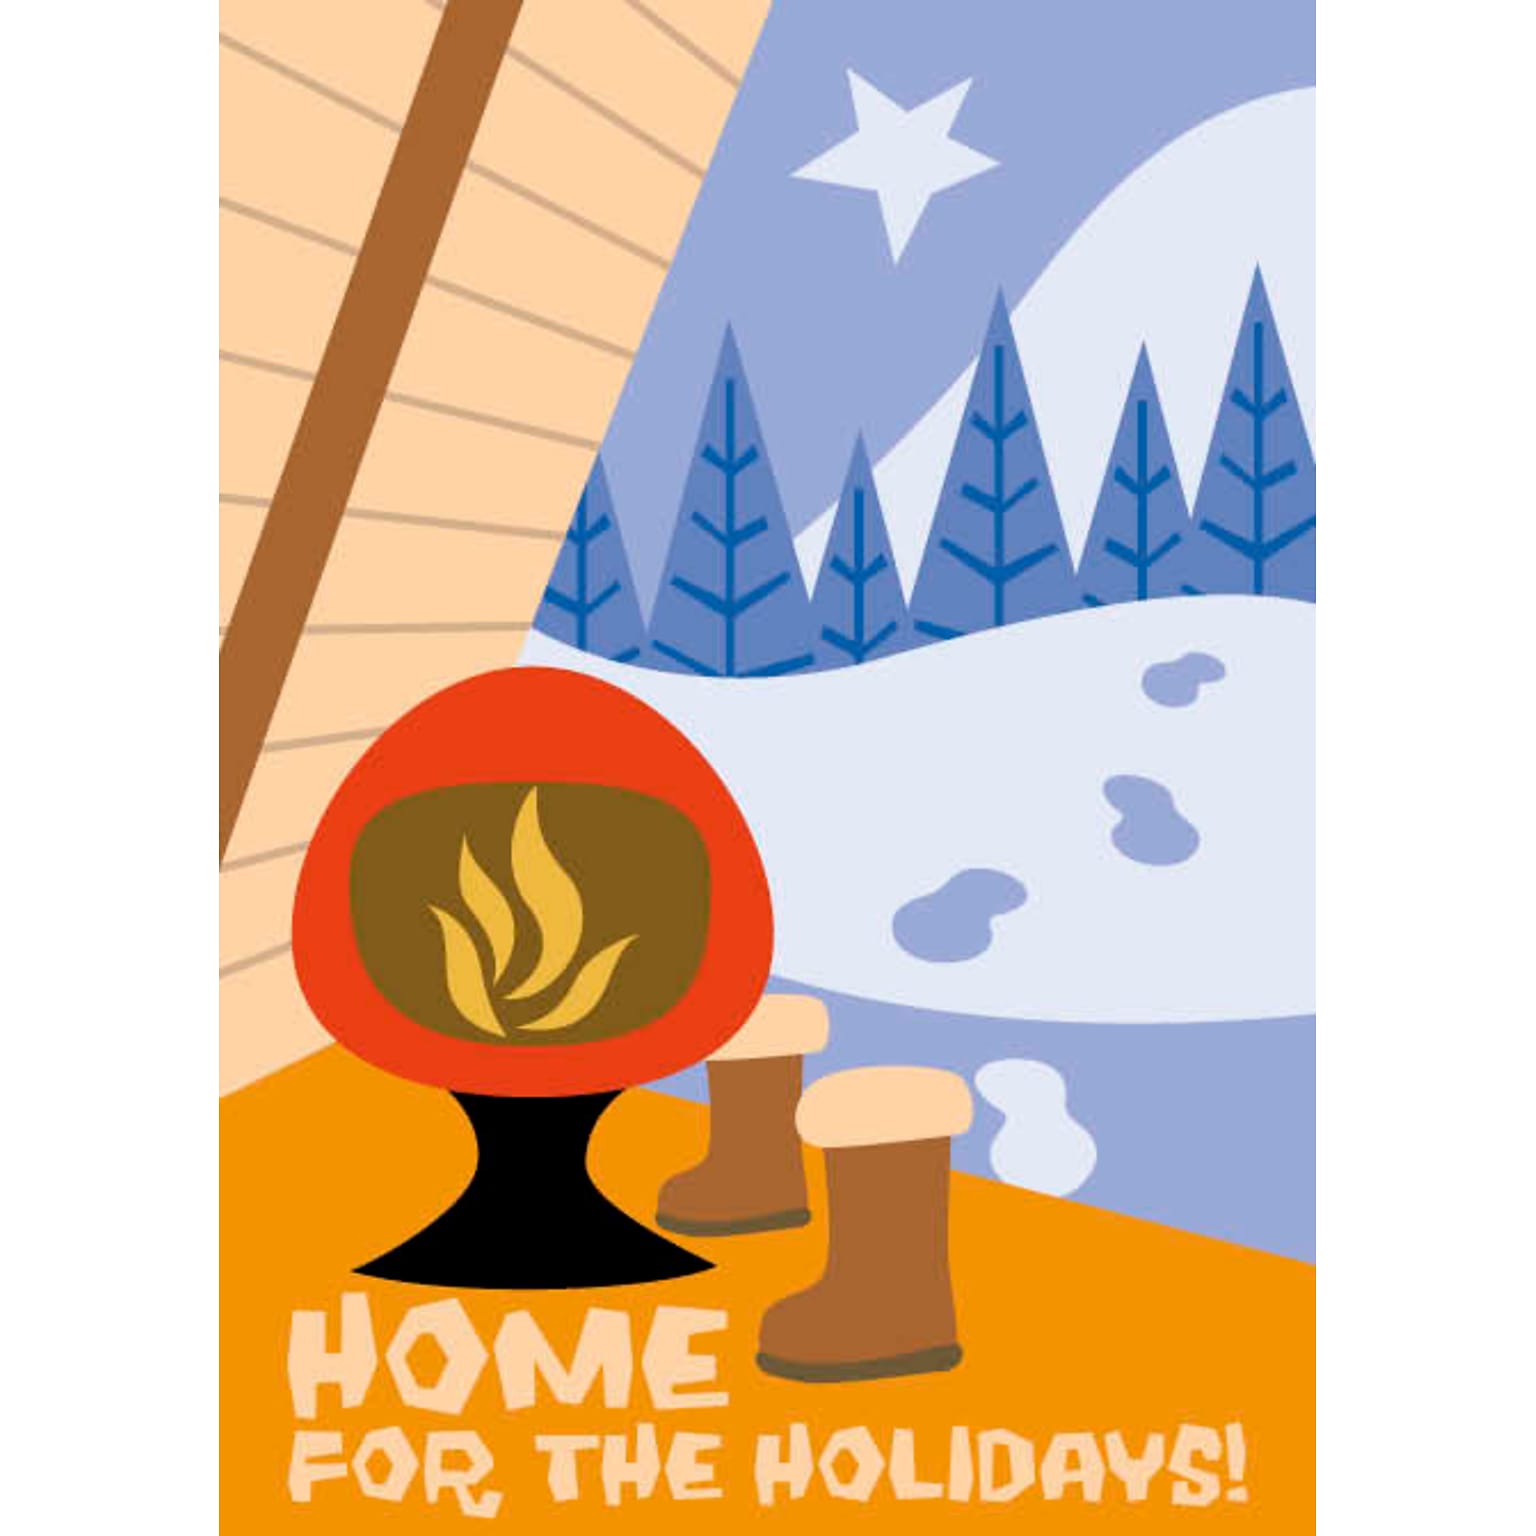 Home For The Holidays Campfire And Boots Holiday Greeting Cards, With A7 Envelopes, 7 x 5, 25 Cards per Set